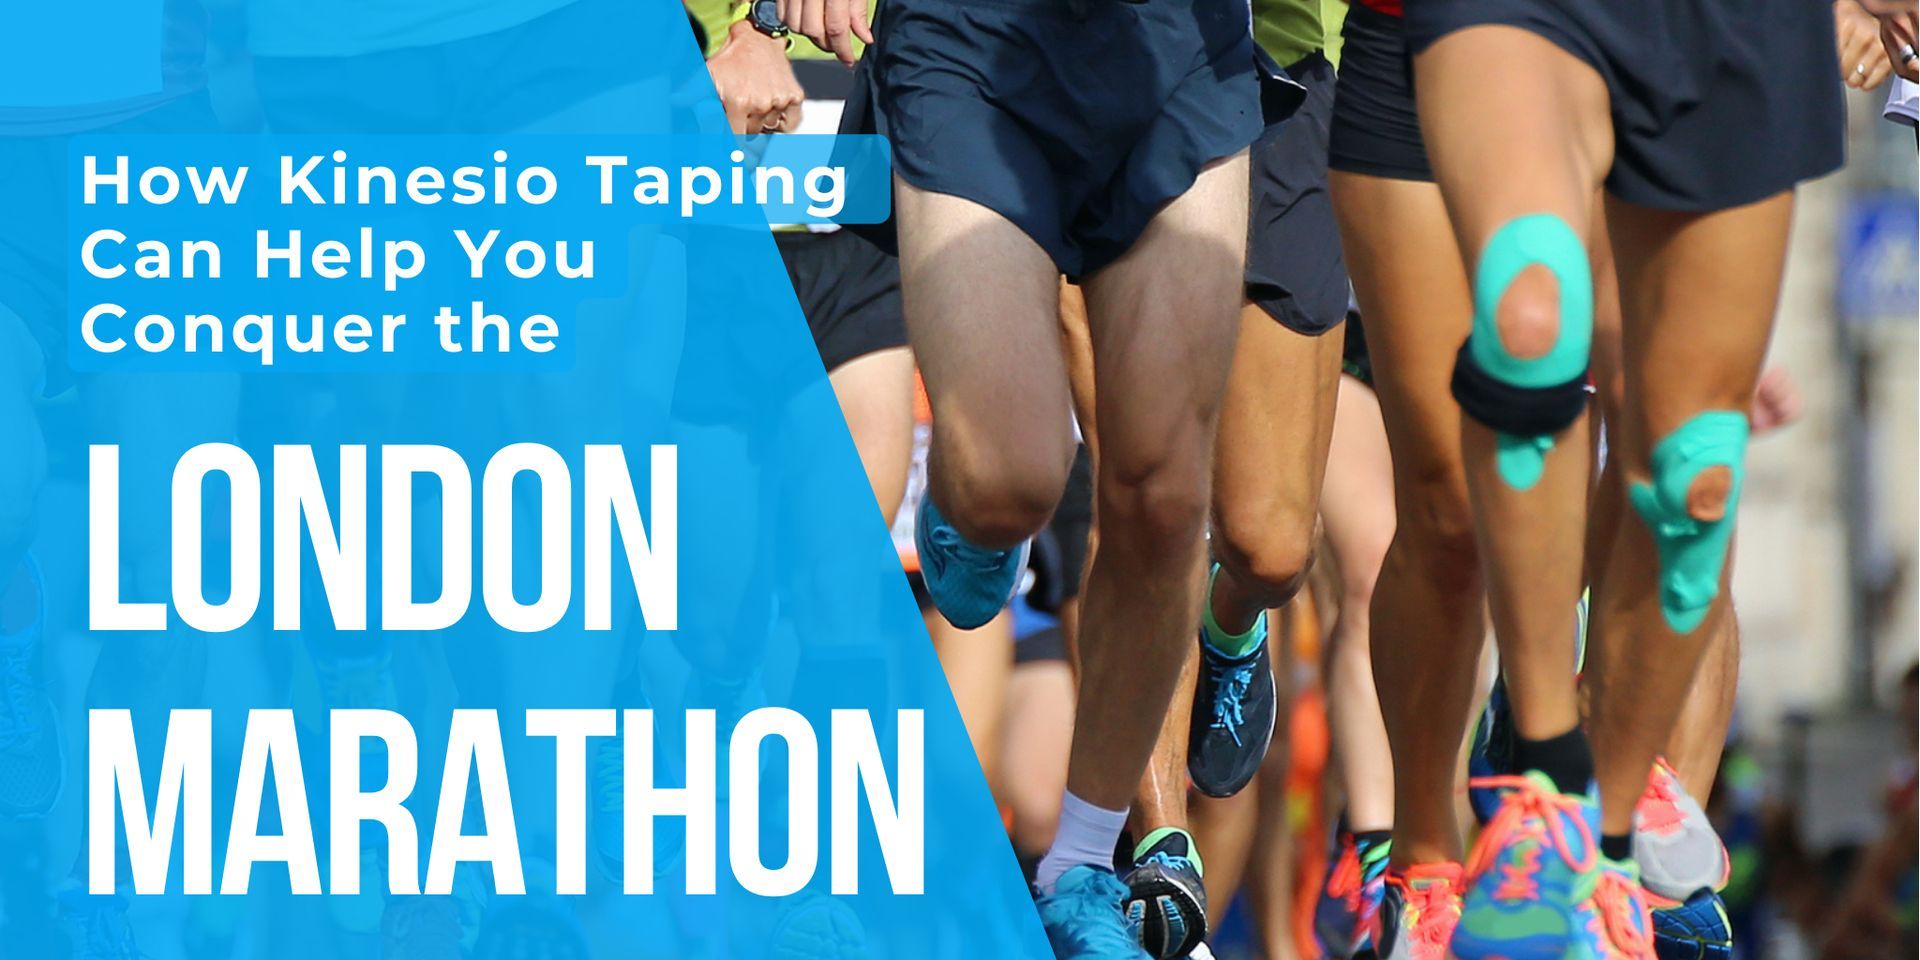 How Kinesio Taping Can Help You Conquer the London Marathon